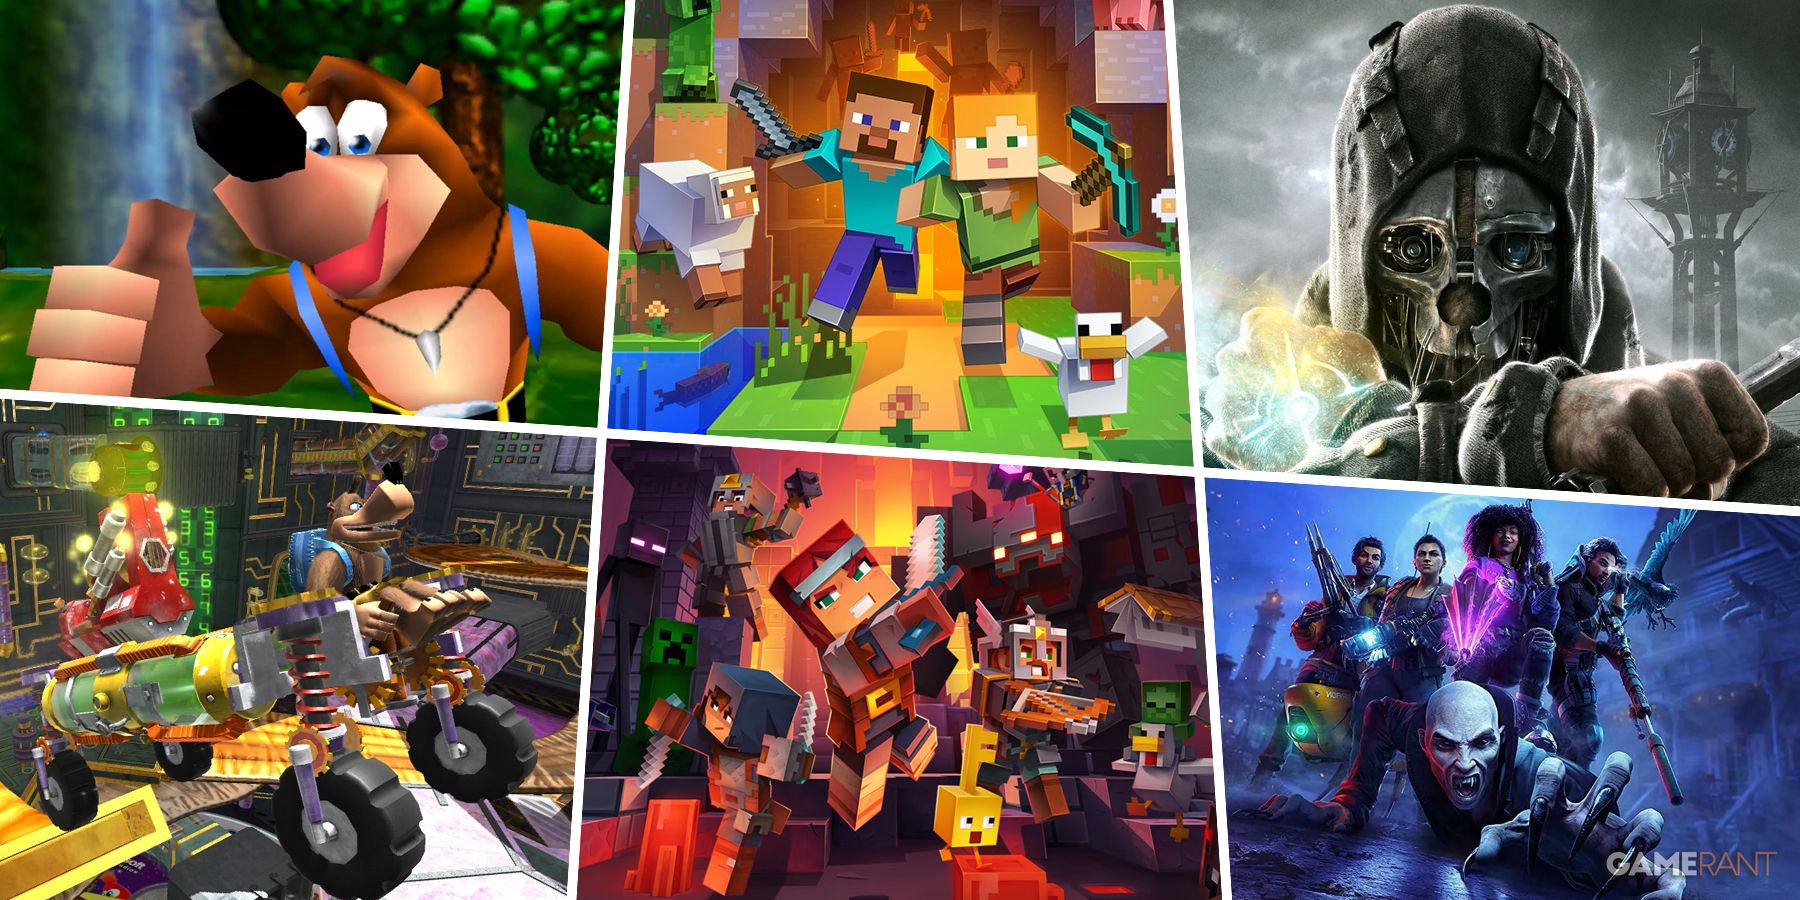 Banjo-Kazooie, Banjo-Kazooie: Nuts & Bolts, Minecraft, Minecraft Dungeons, Dishonored, and Redfall